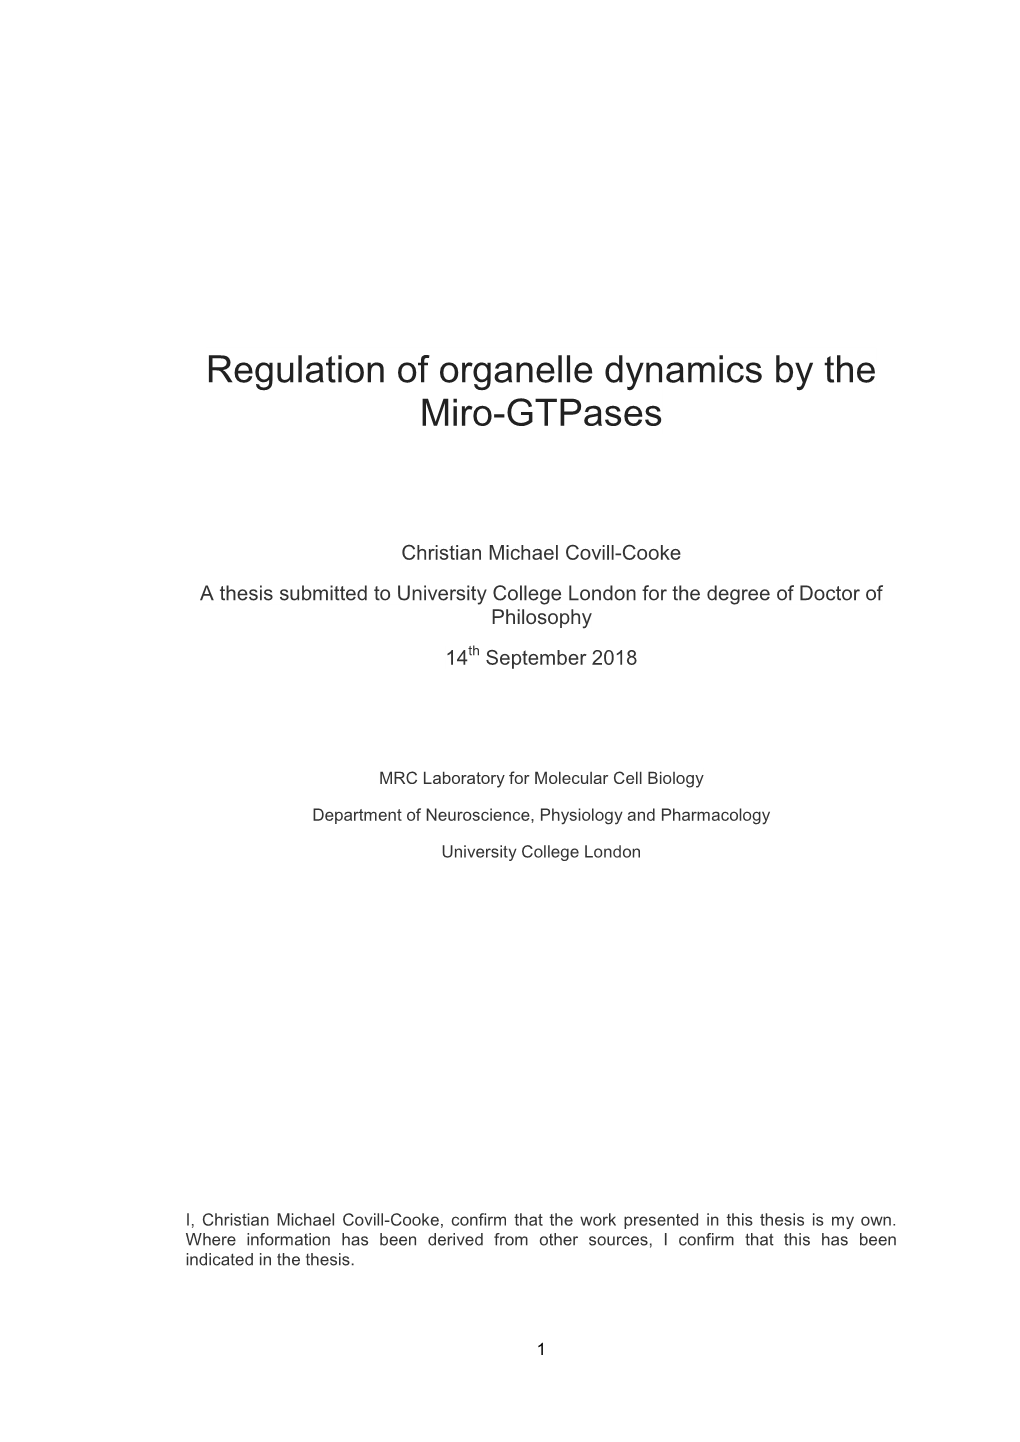 Regulation of Organelle Dynamics by the Miro-Gtpases